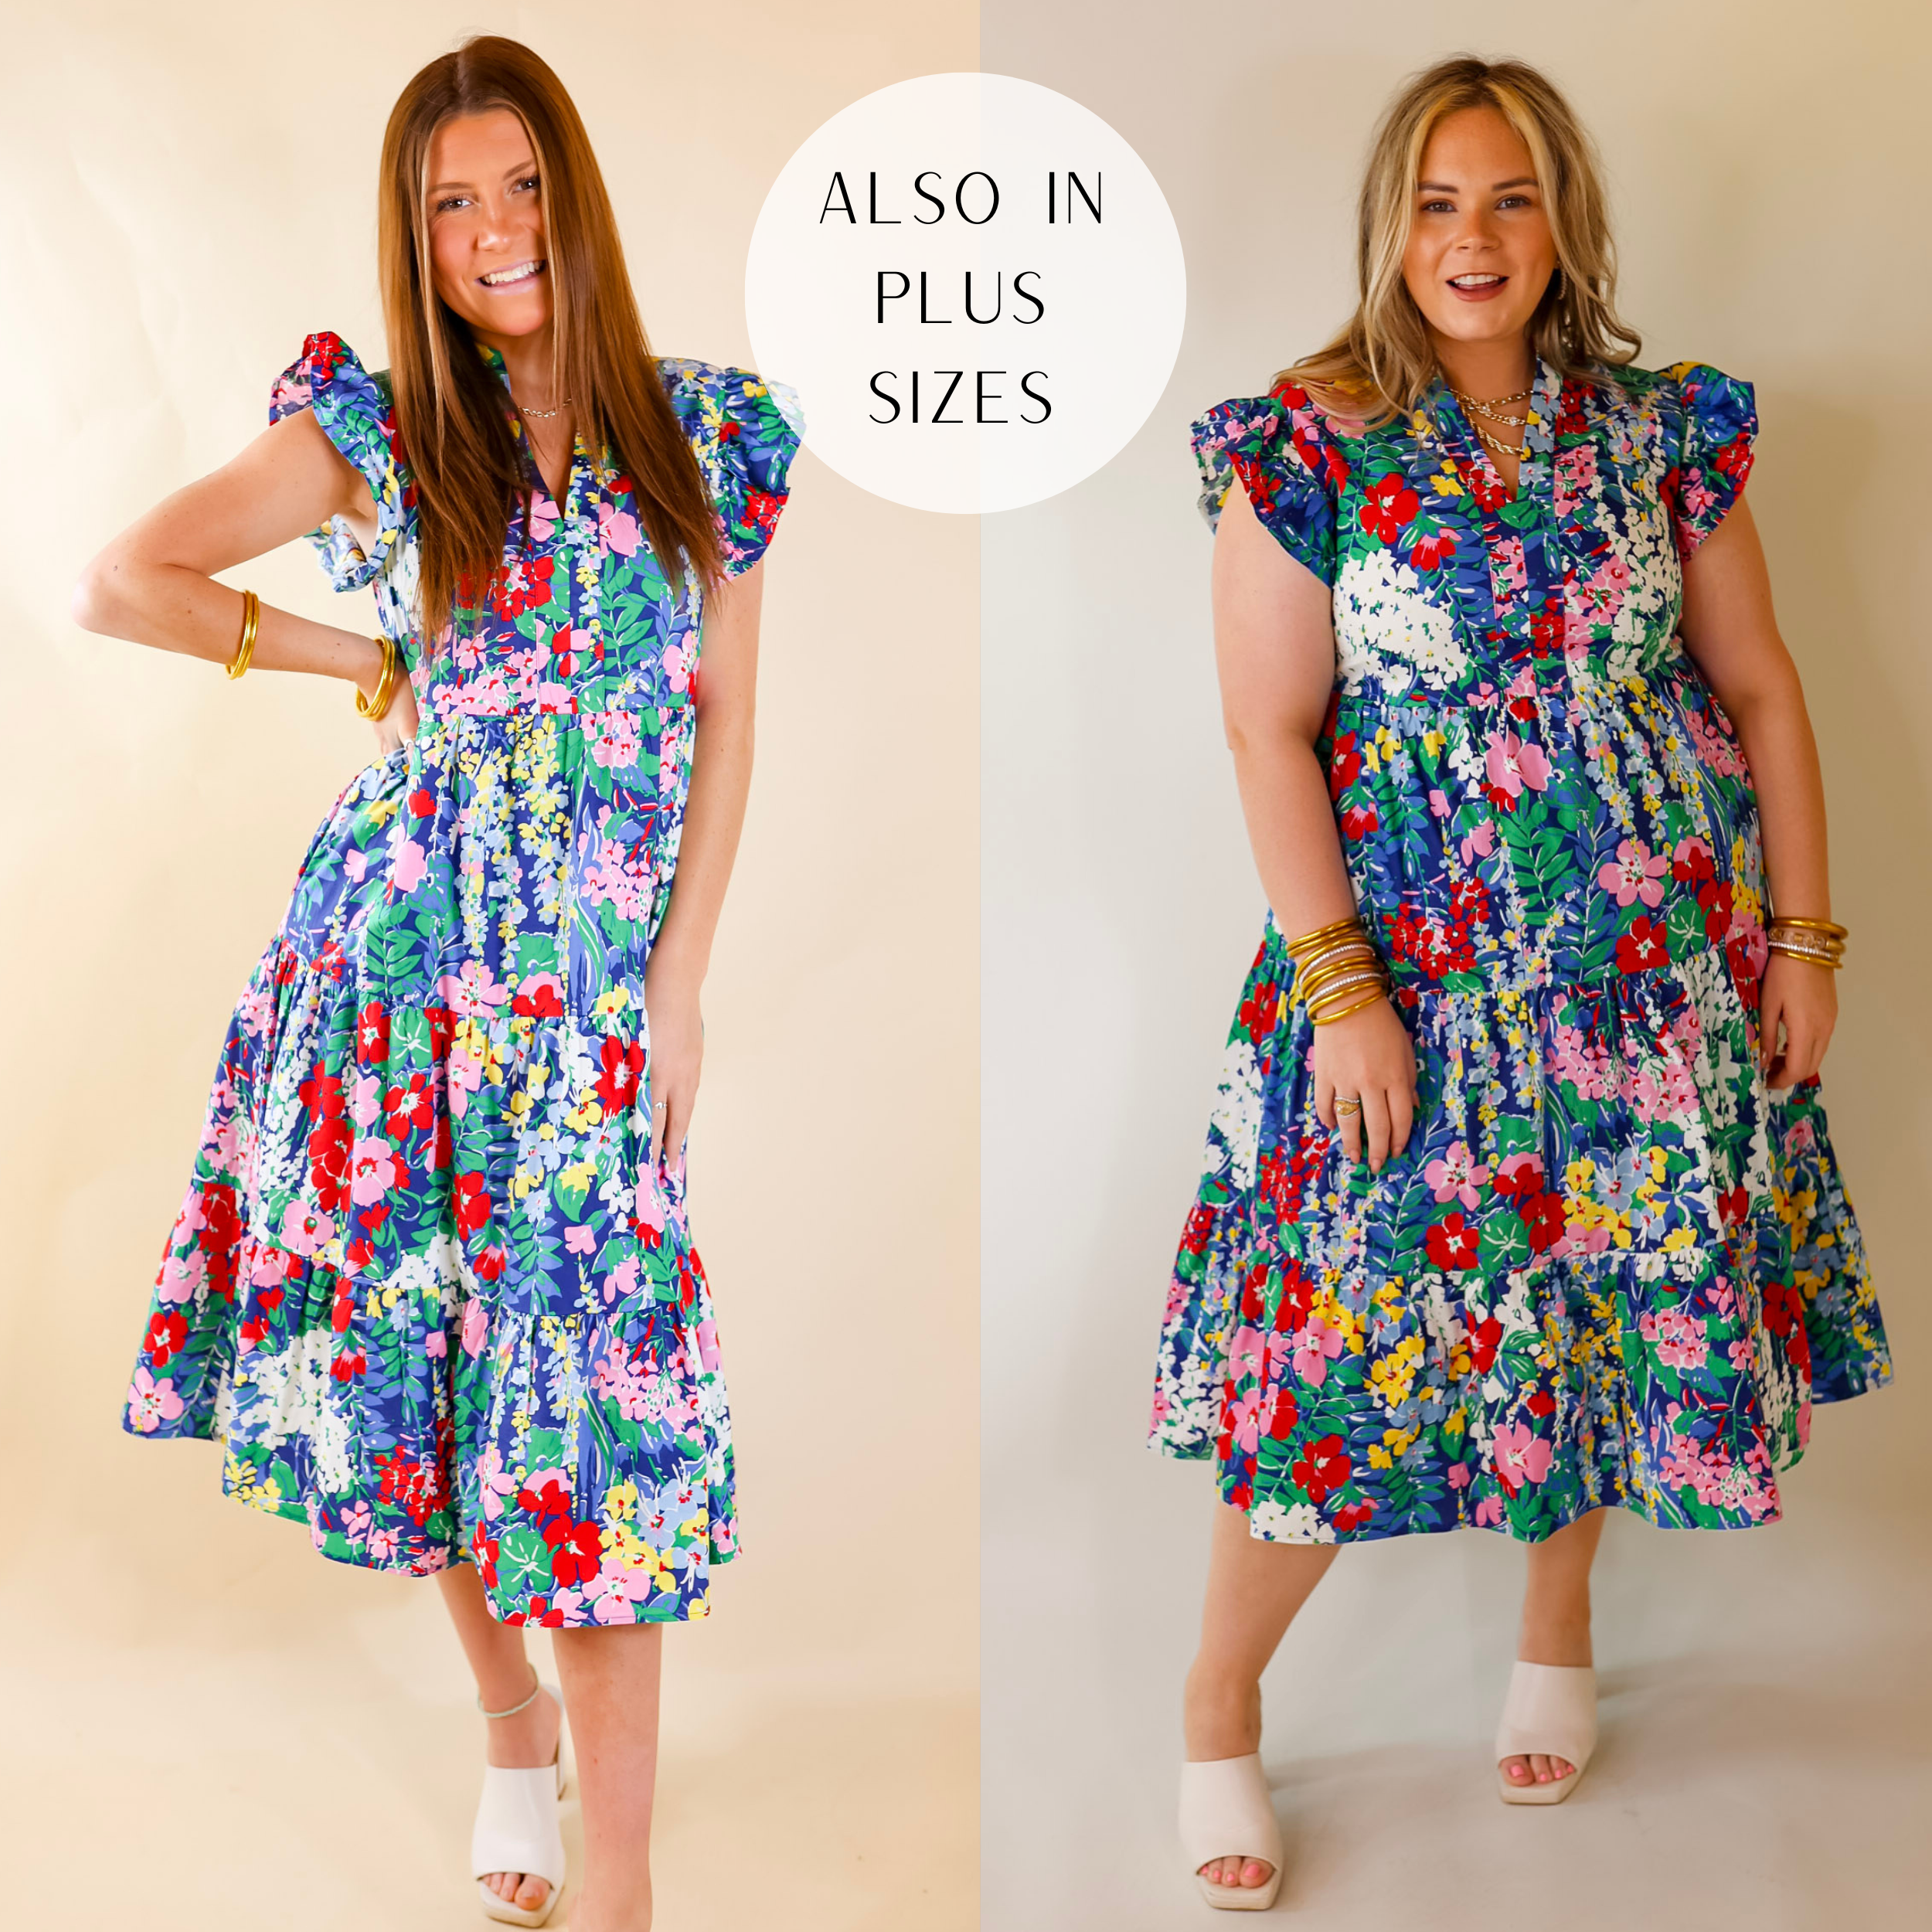 Model is wearing a midi length dress with a floral print and ruffle cap sleeves in blue. Model has this dress paired with gold jewelry and white heels. Background is solid tan.